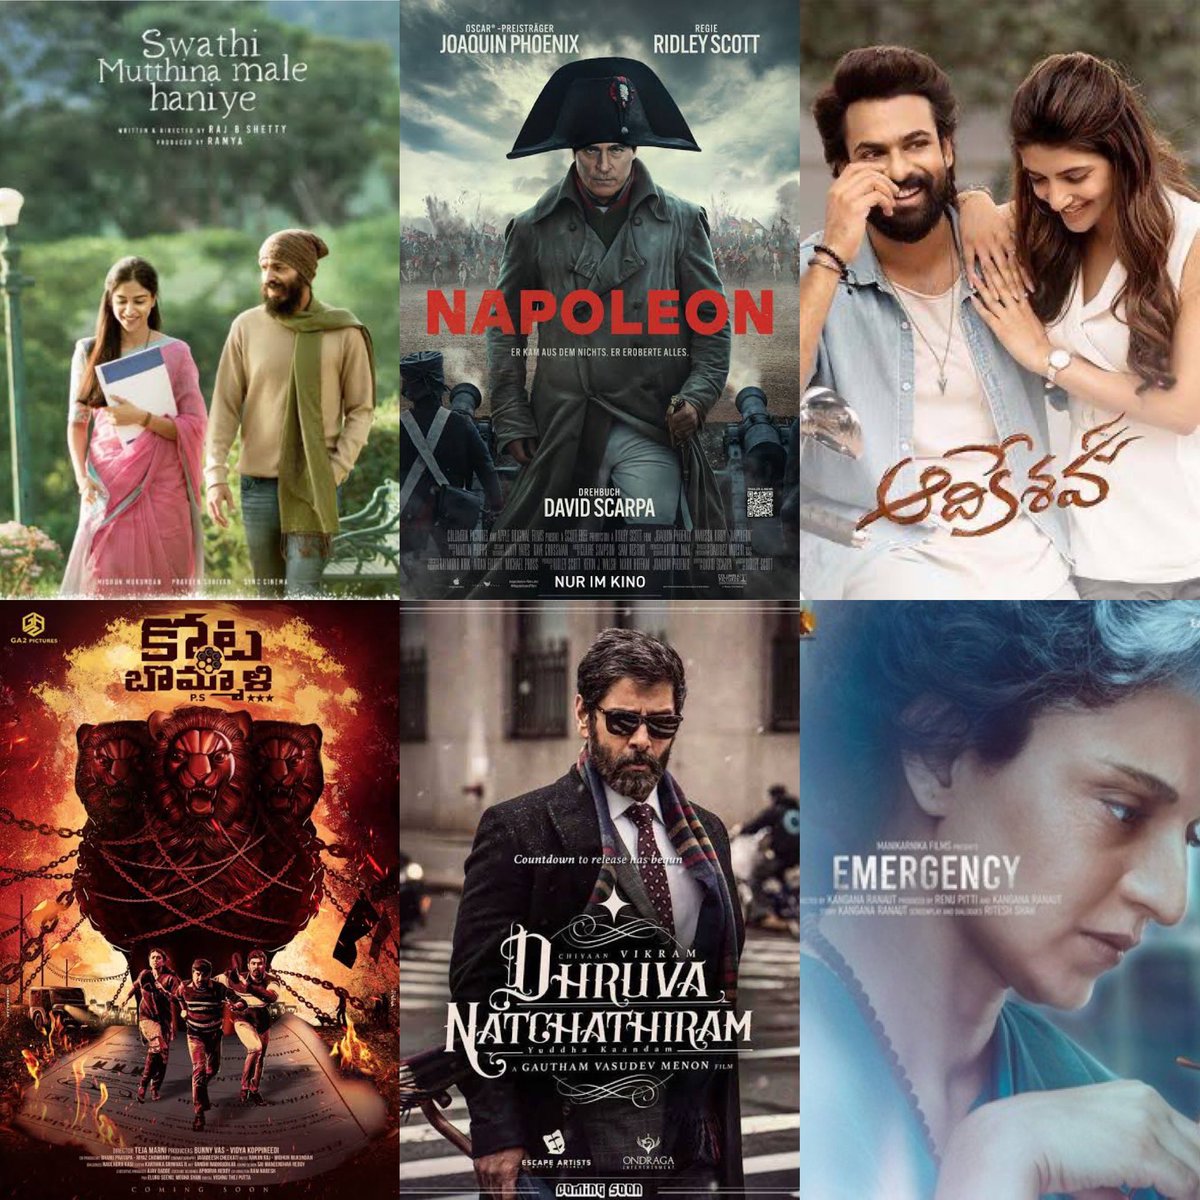 This Friday was good with #SSESideB & #Mangalavaaram 

Let’s see what we have in store for next week. 😎

#DhruvaNakshathram 
#Napolean
#Emergency
#Aadikeshava 
#KotabommaliPS 
#SwathiMutthinaMaleHaniye

What are you most excited for?